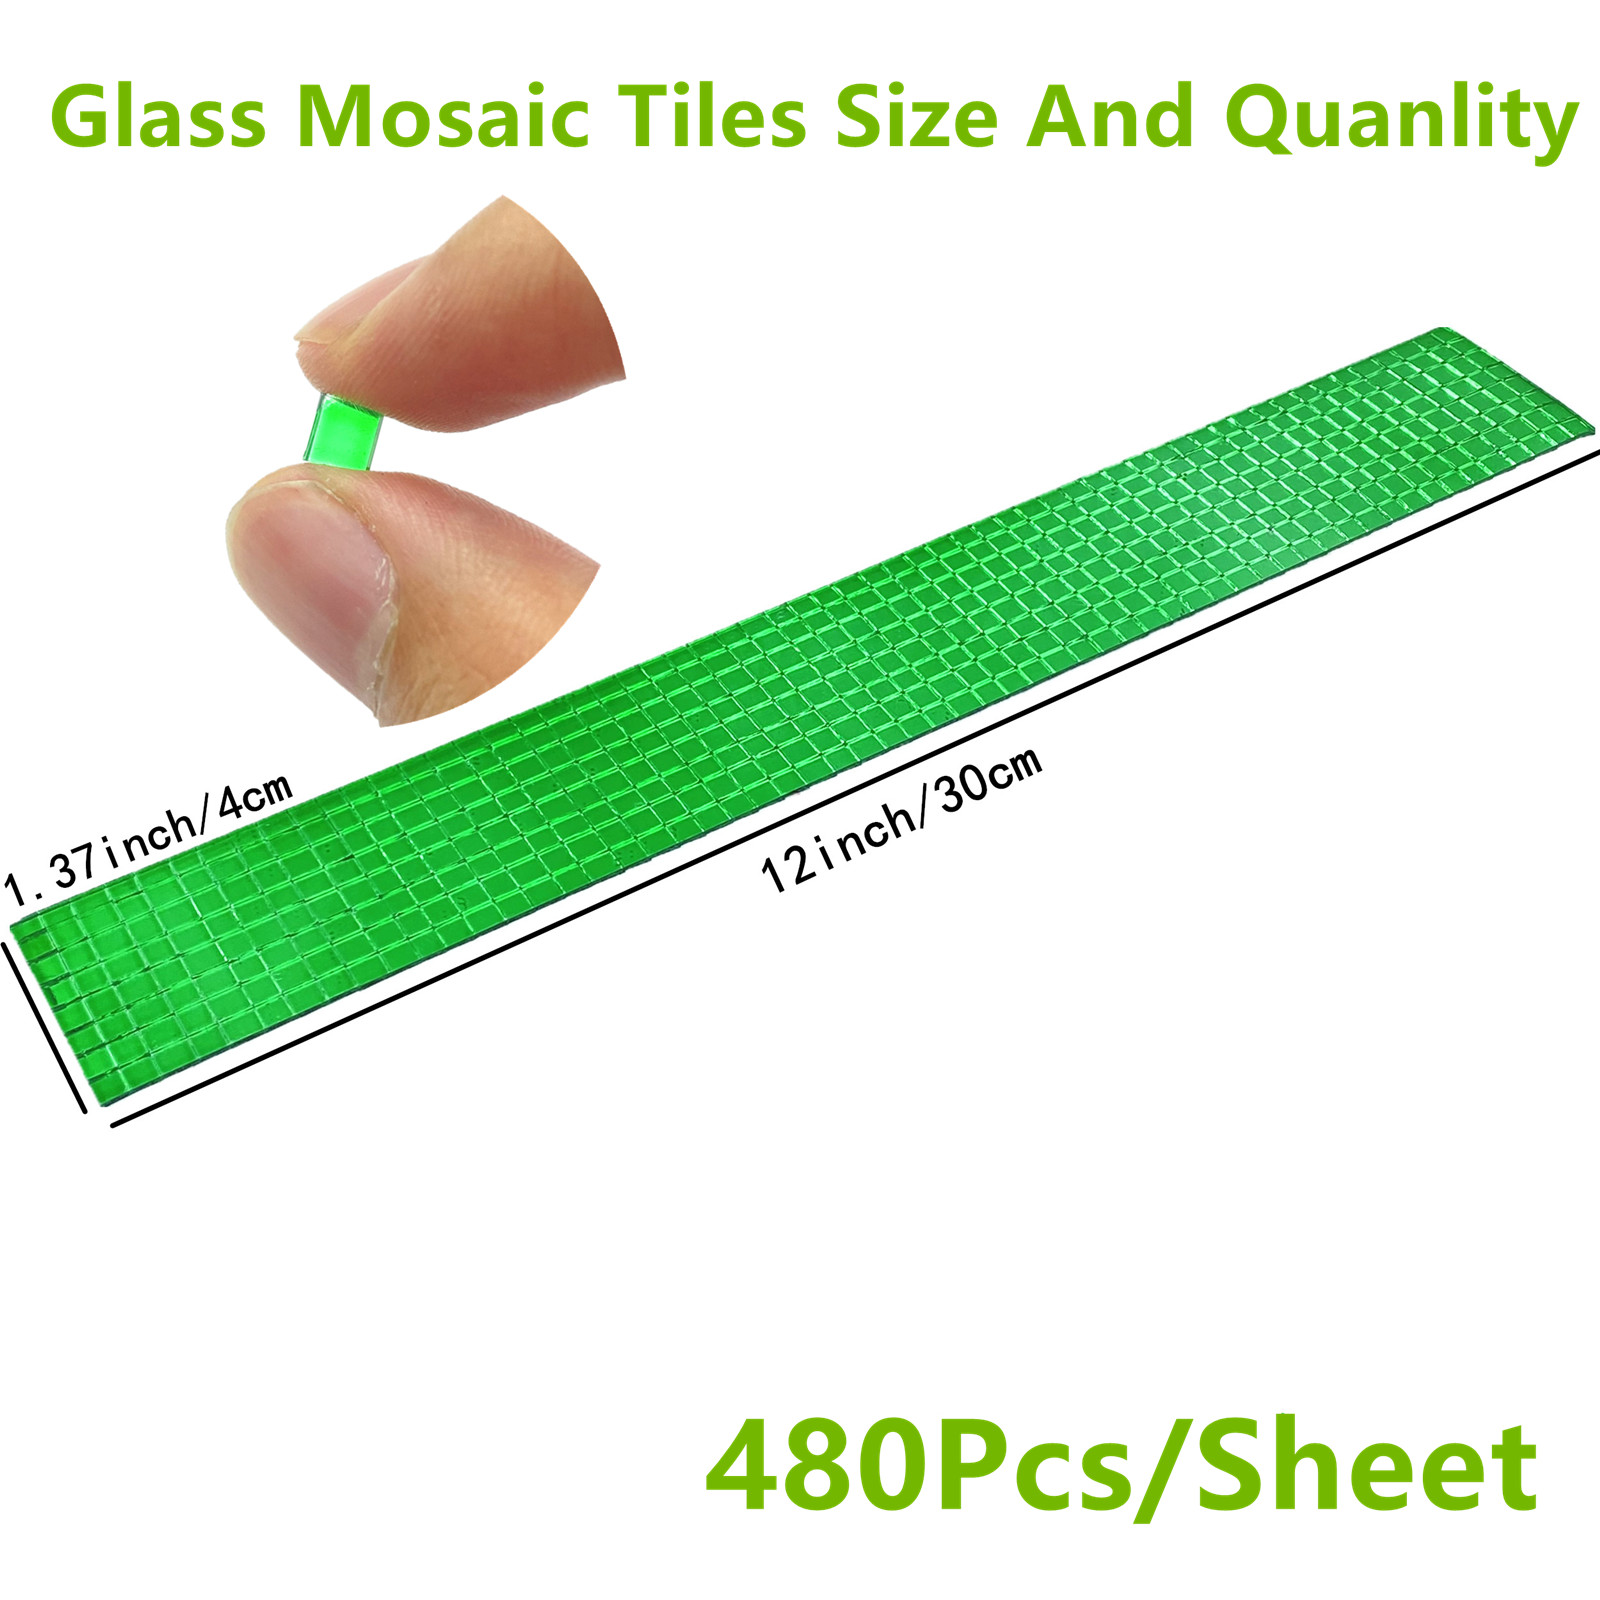 7200pcs Mirrors Mosaic Tiles Disco Ball Mirror Tiles Self-Adhesive Real Square Glass Mirror Tiles for Craft Diy,15 Sheets (Green), Size: 4cm*30cm*